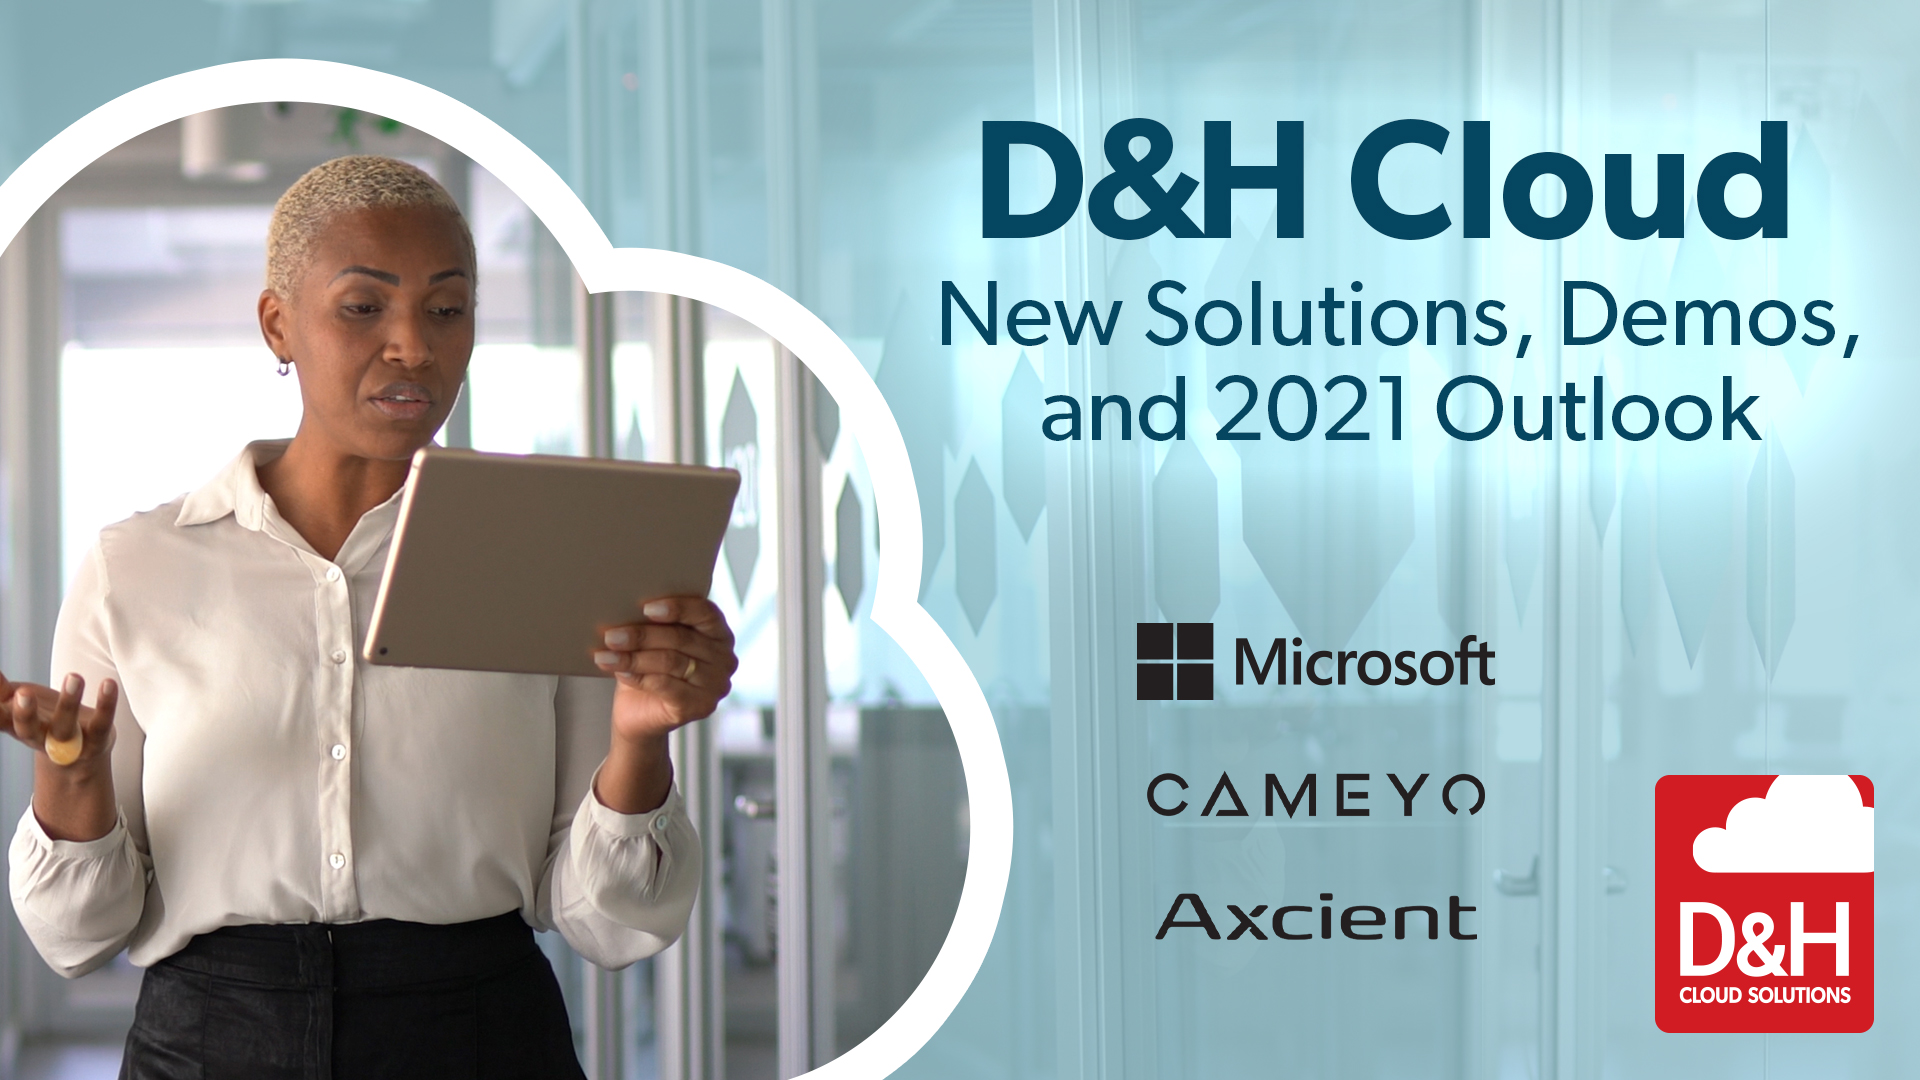 D&H Cloud: New Solutions, Demos, and 2021 Outlook